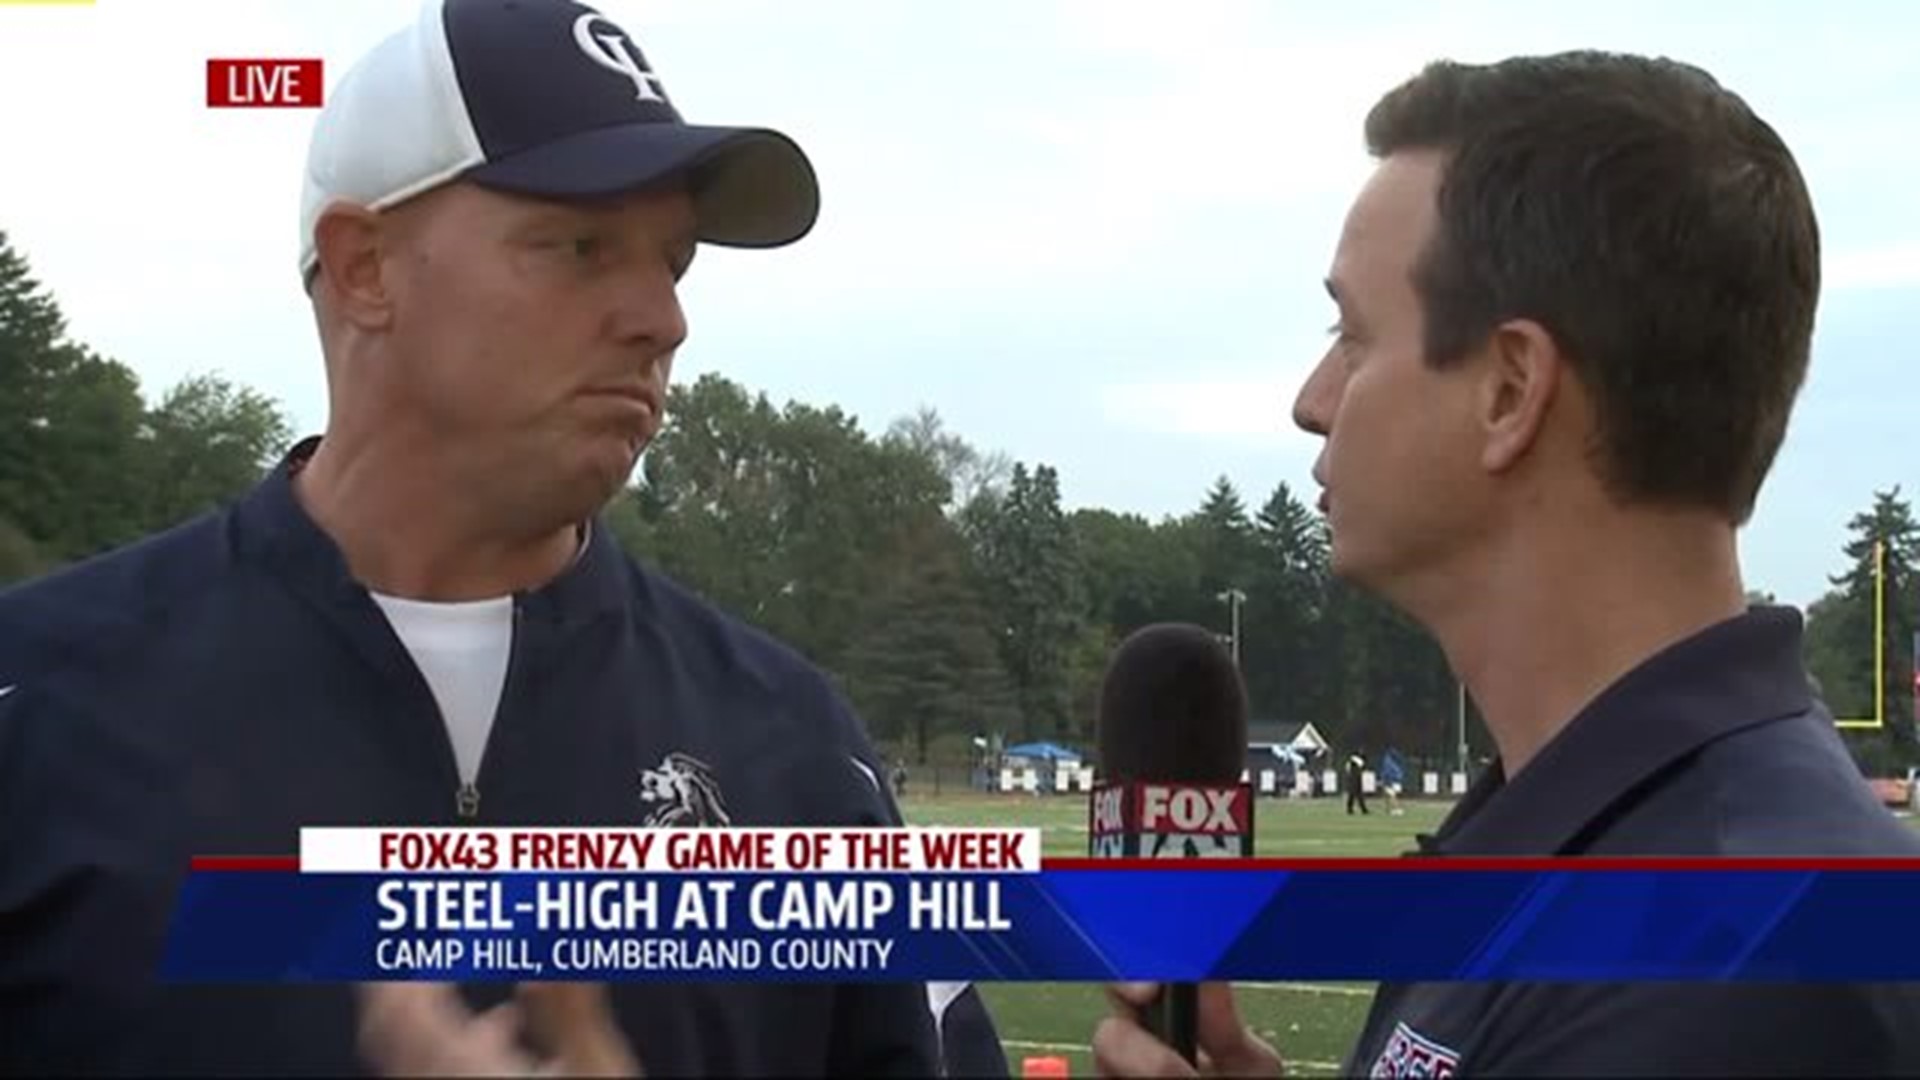 HSFF `Game of the Week Coaches Interviews`